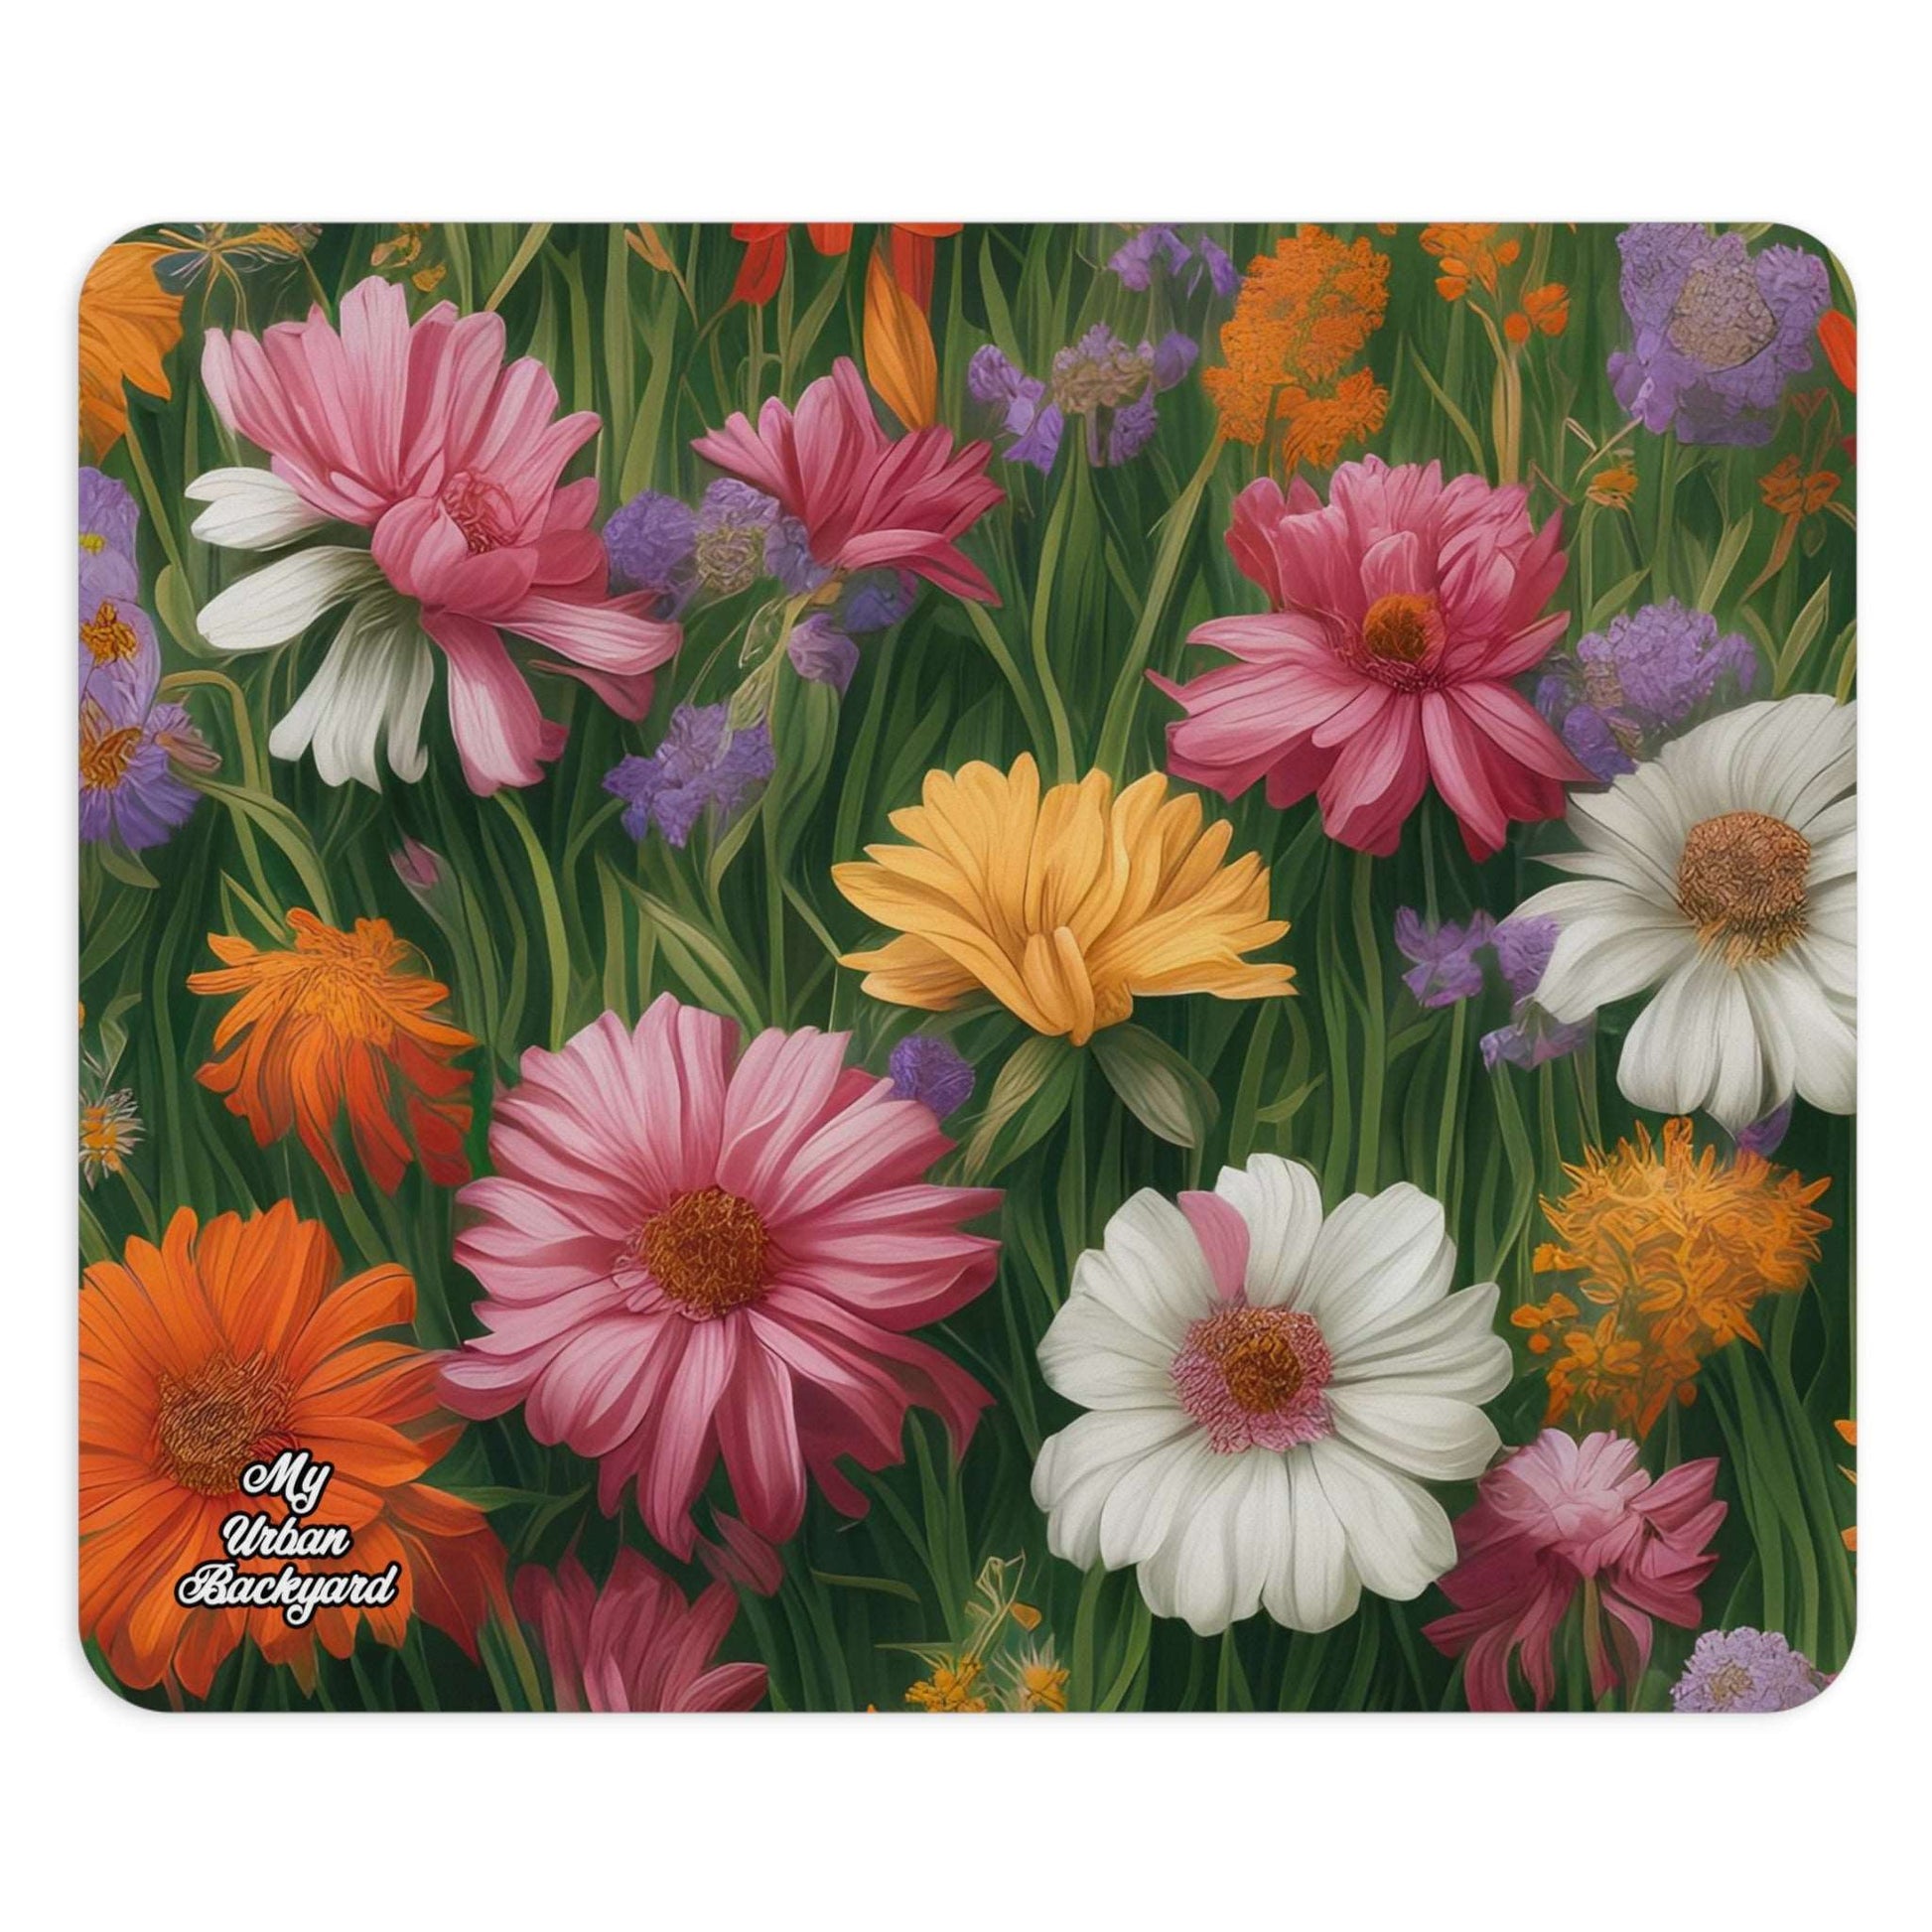 Computer Mouse Pad, Non-slip rubber bottom, Wildflower Field